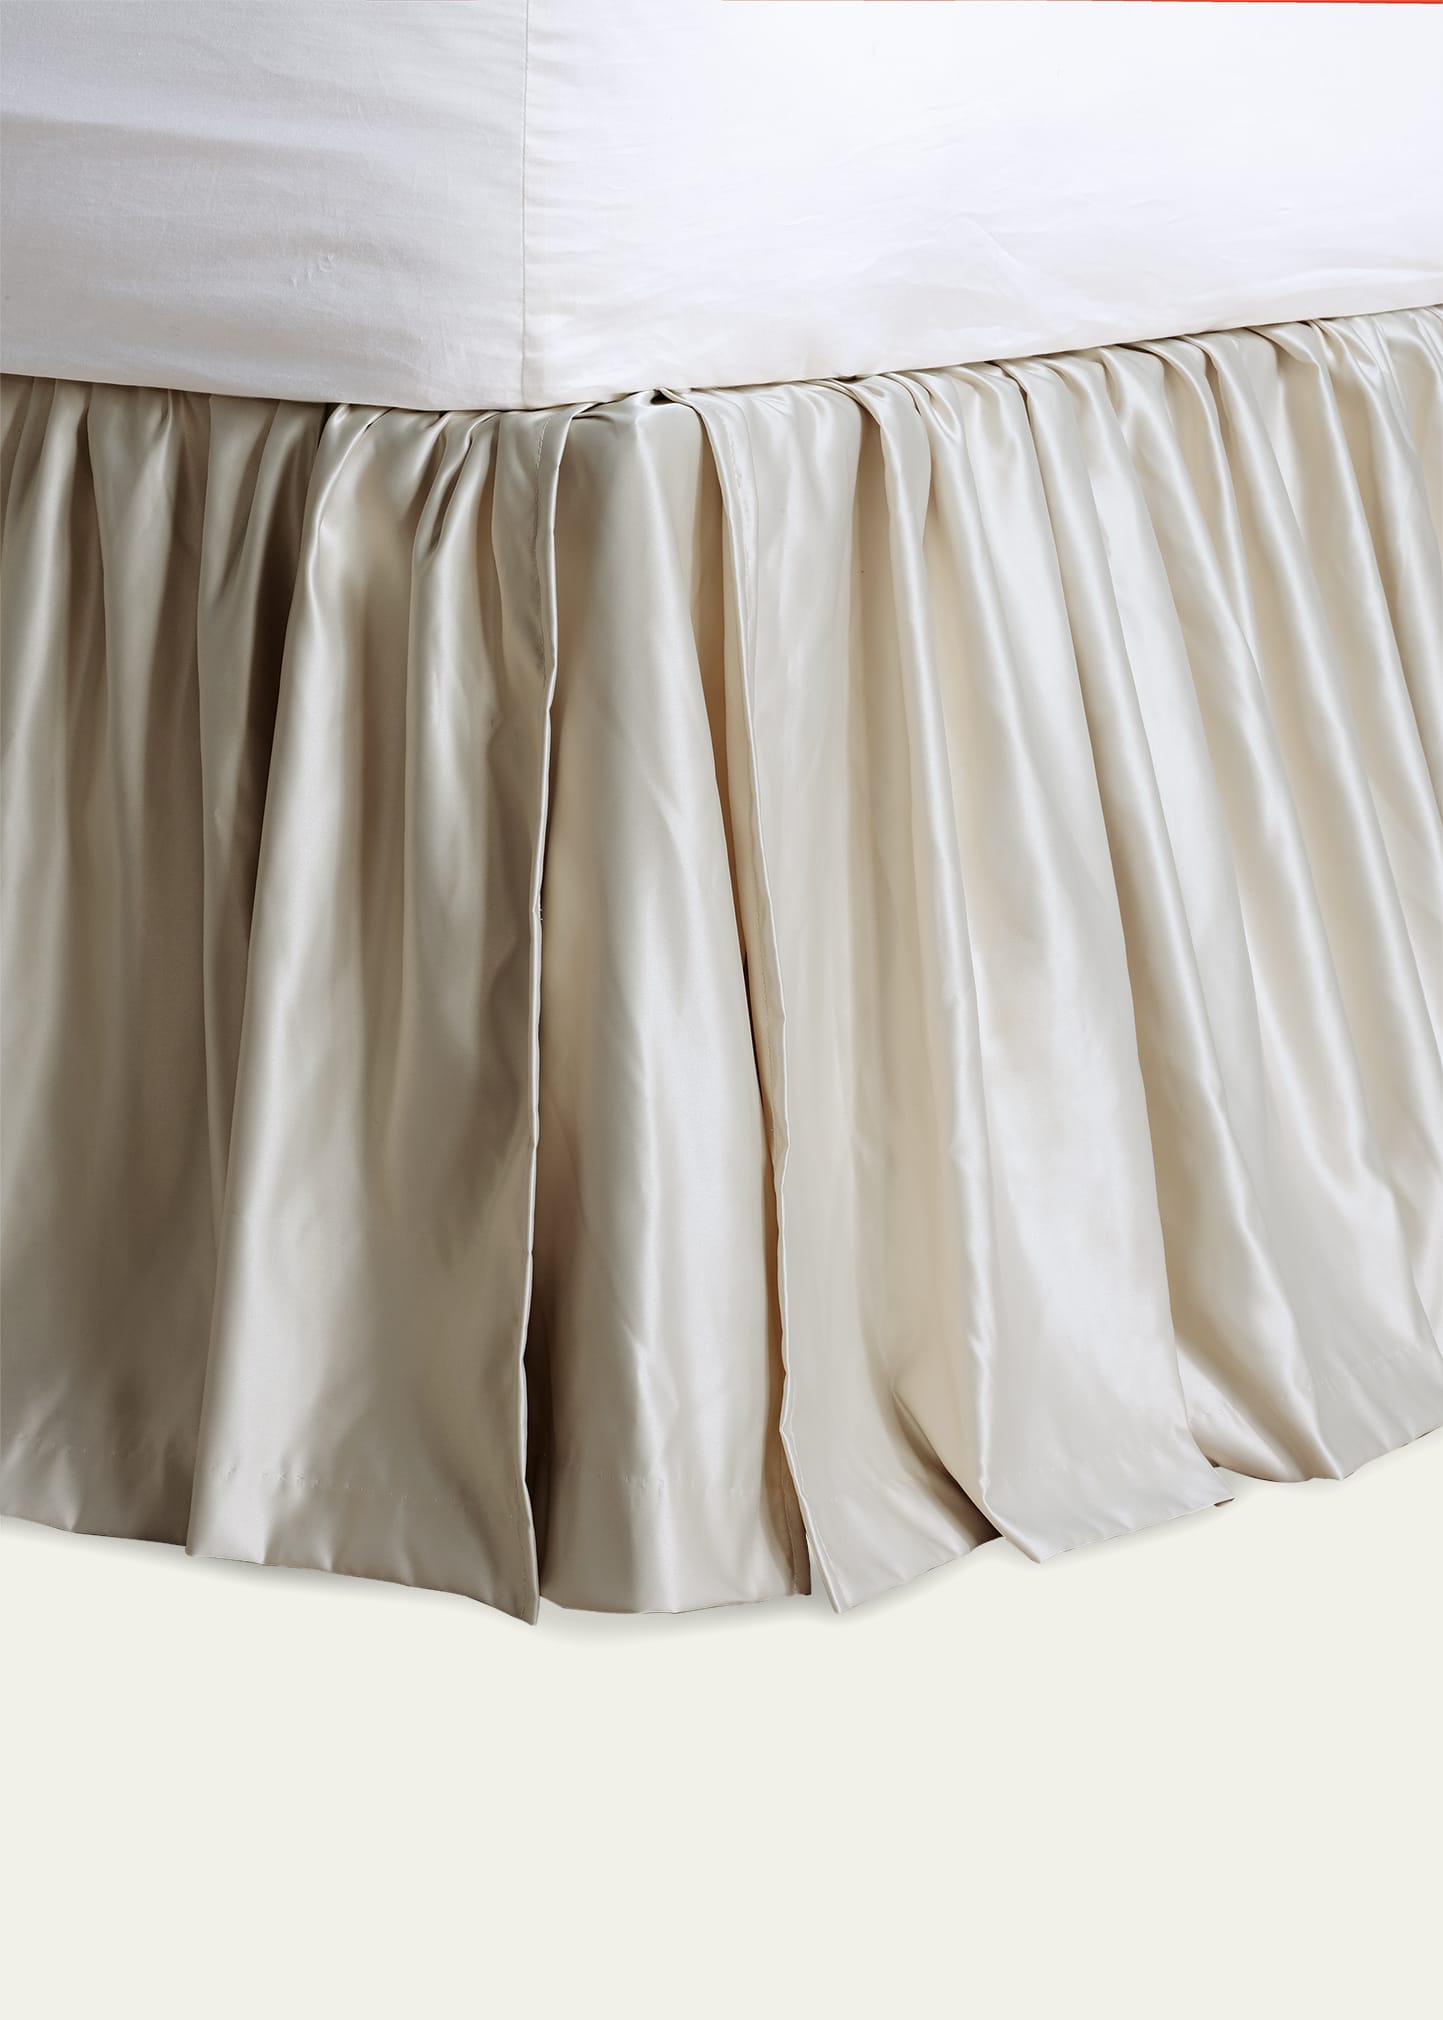 Eastern Accents Jolene King Bed Skirt In Neutral